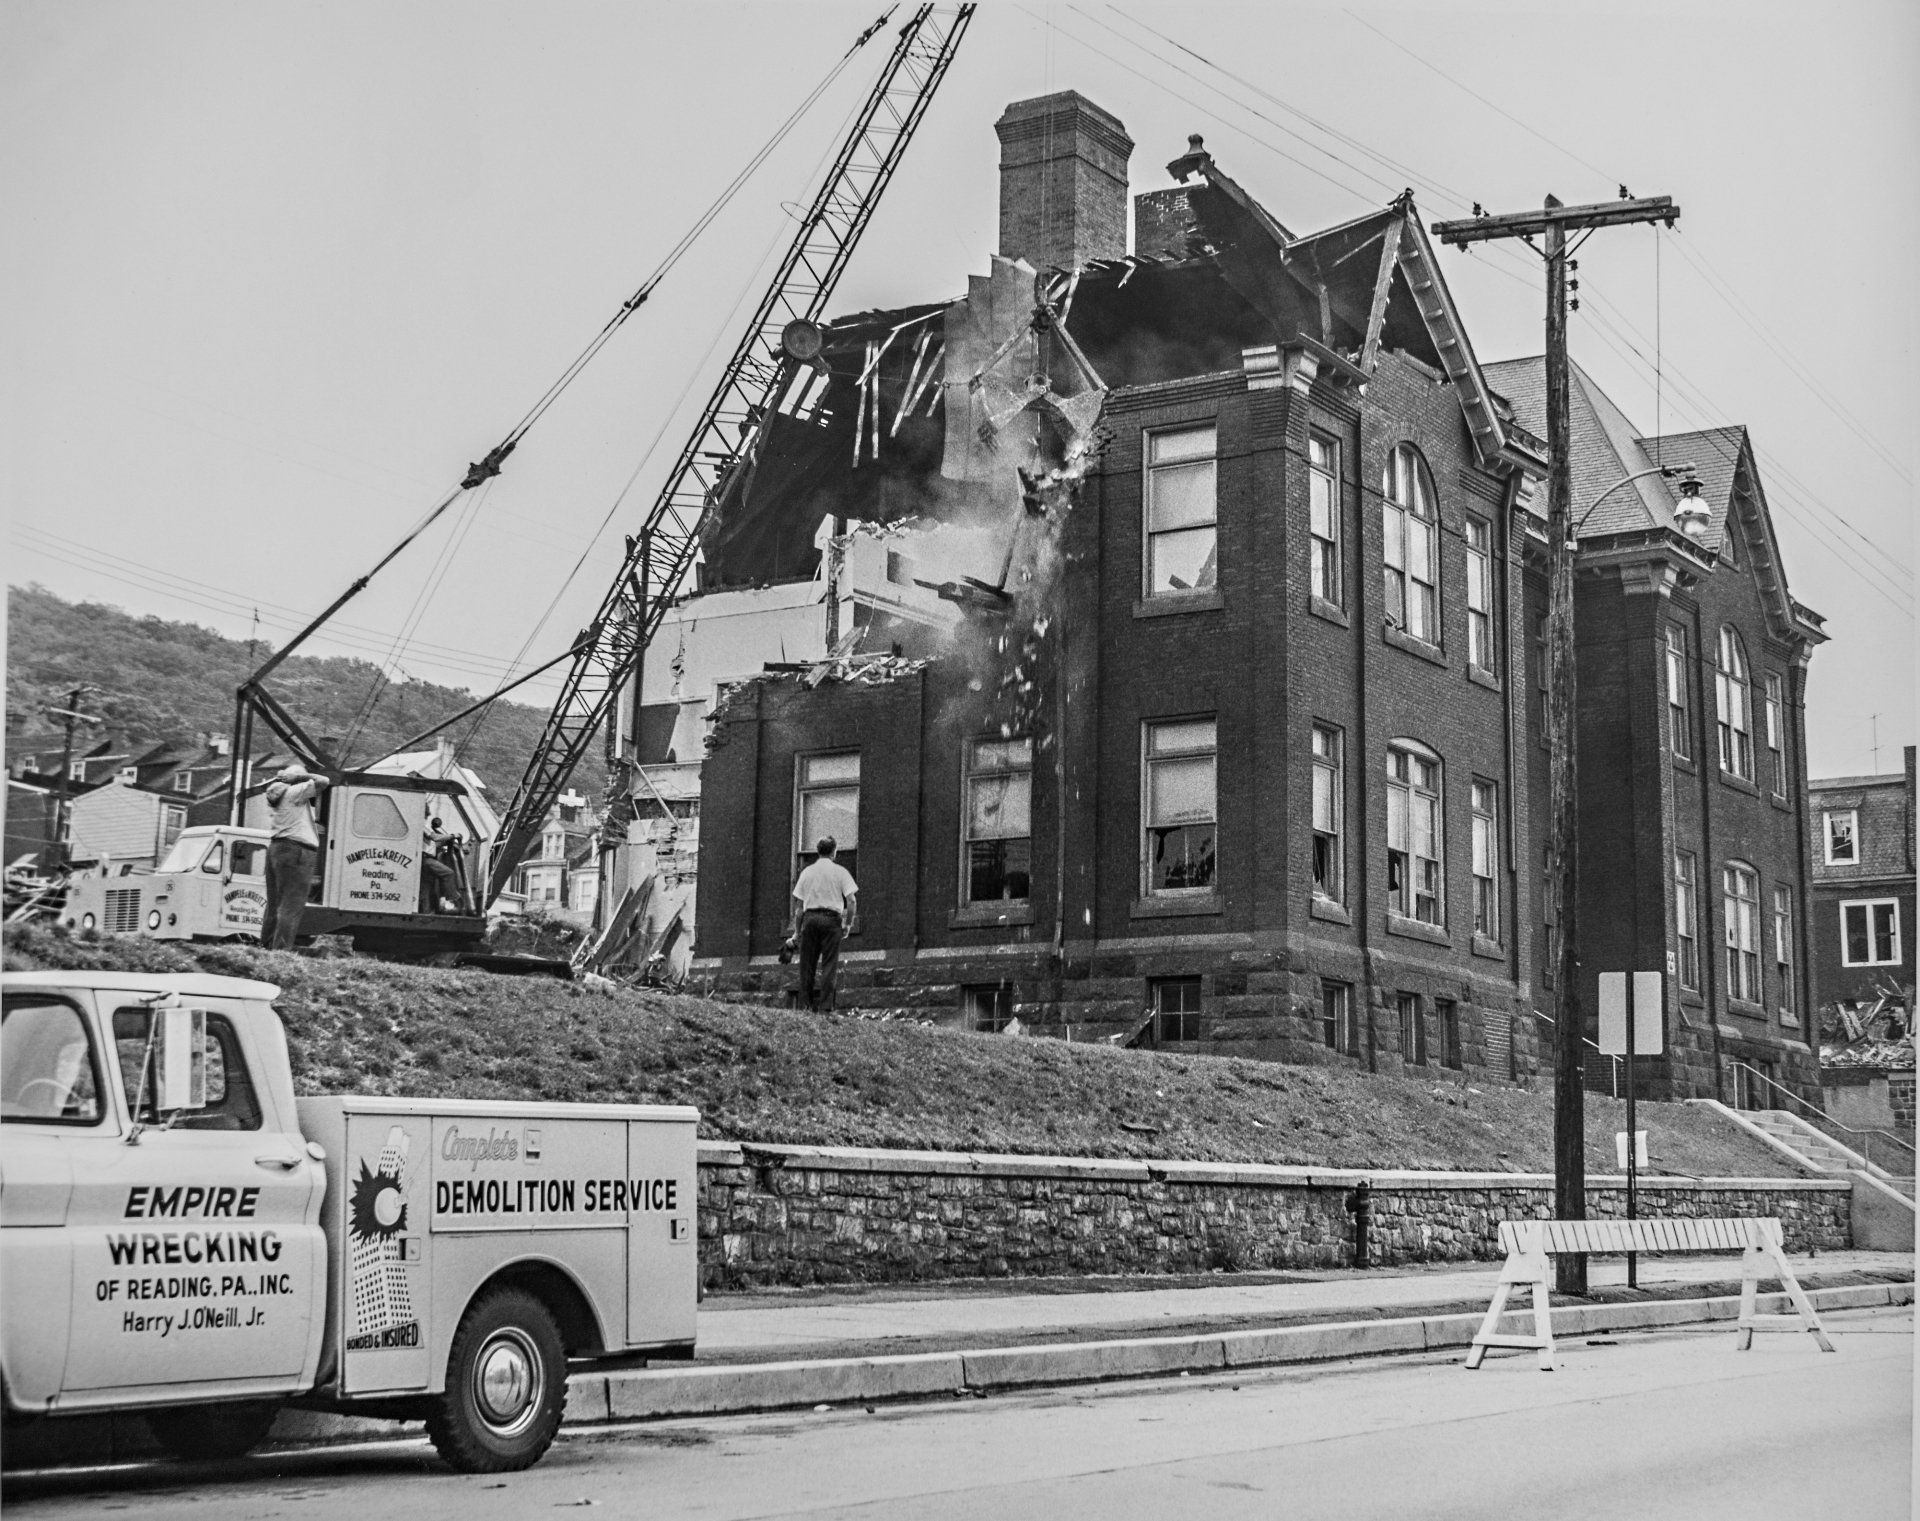 A demolition truck is parked in front of a brick building